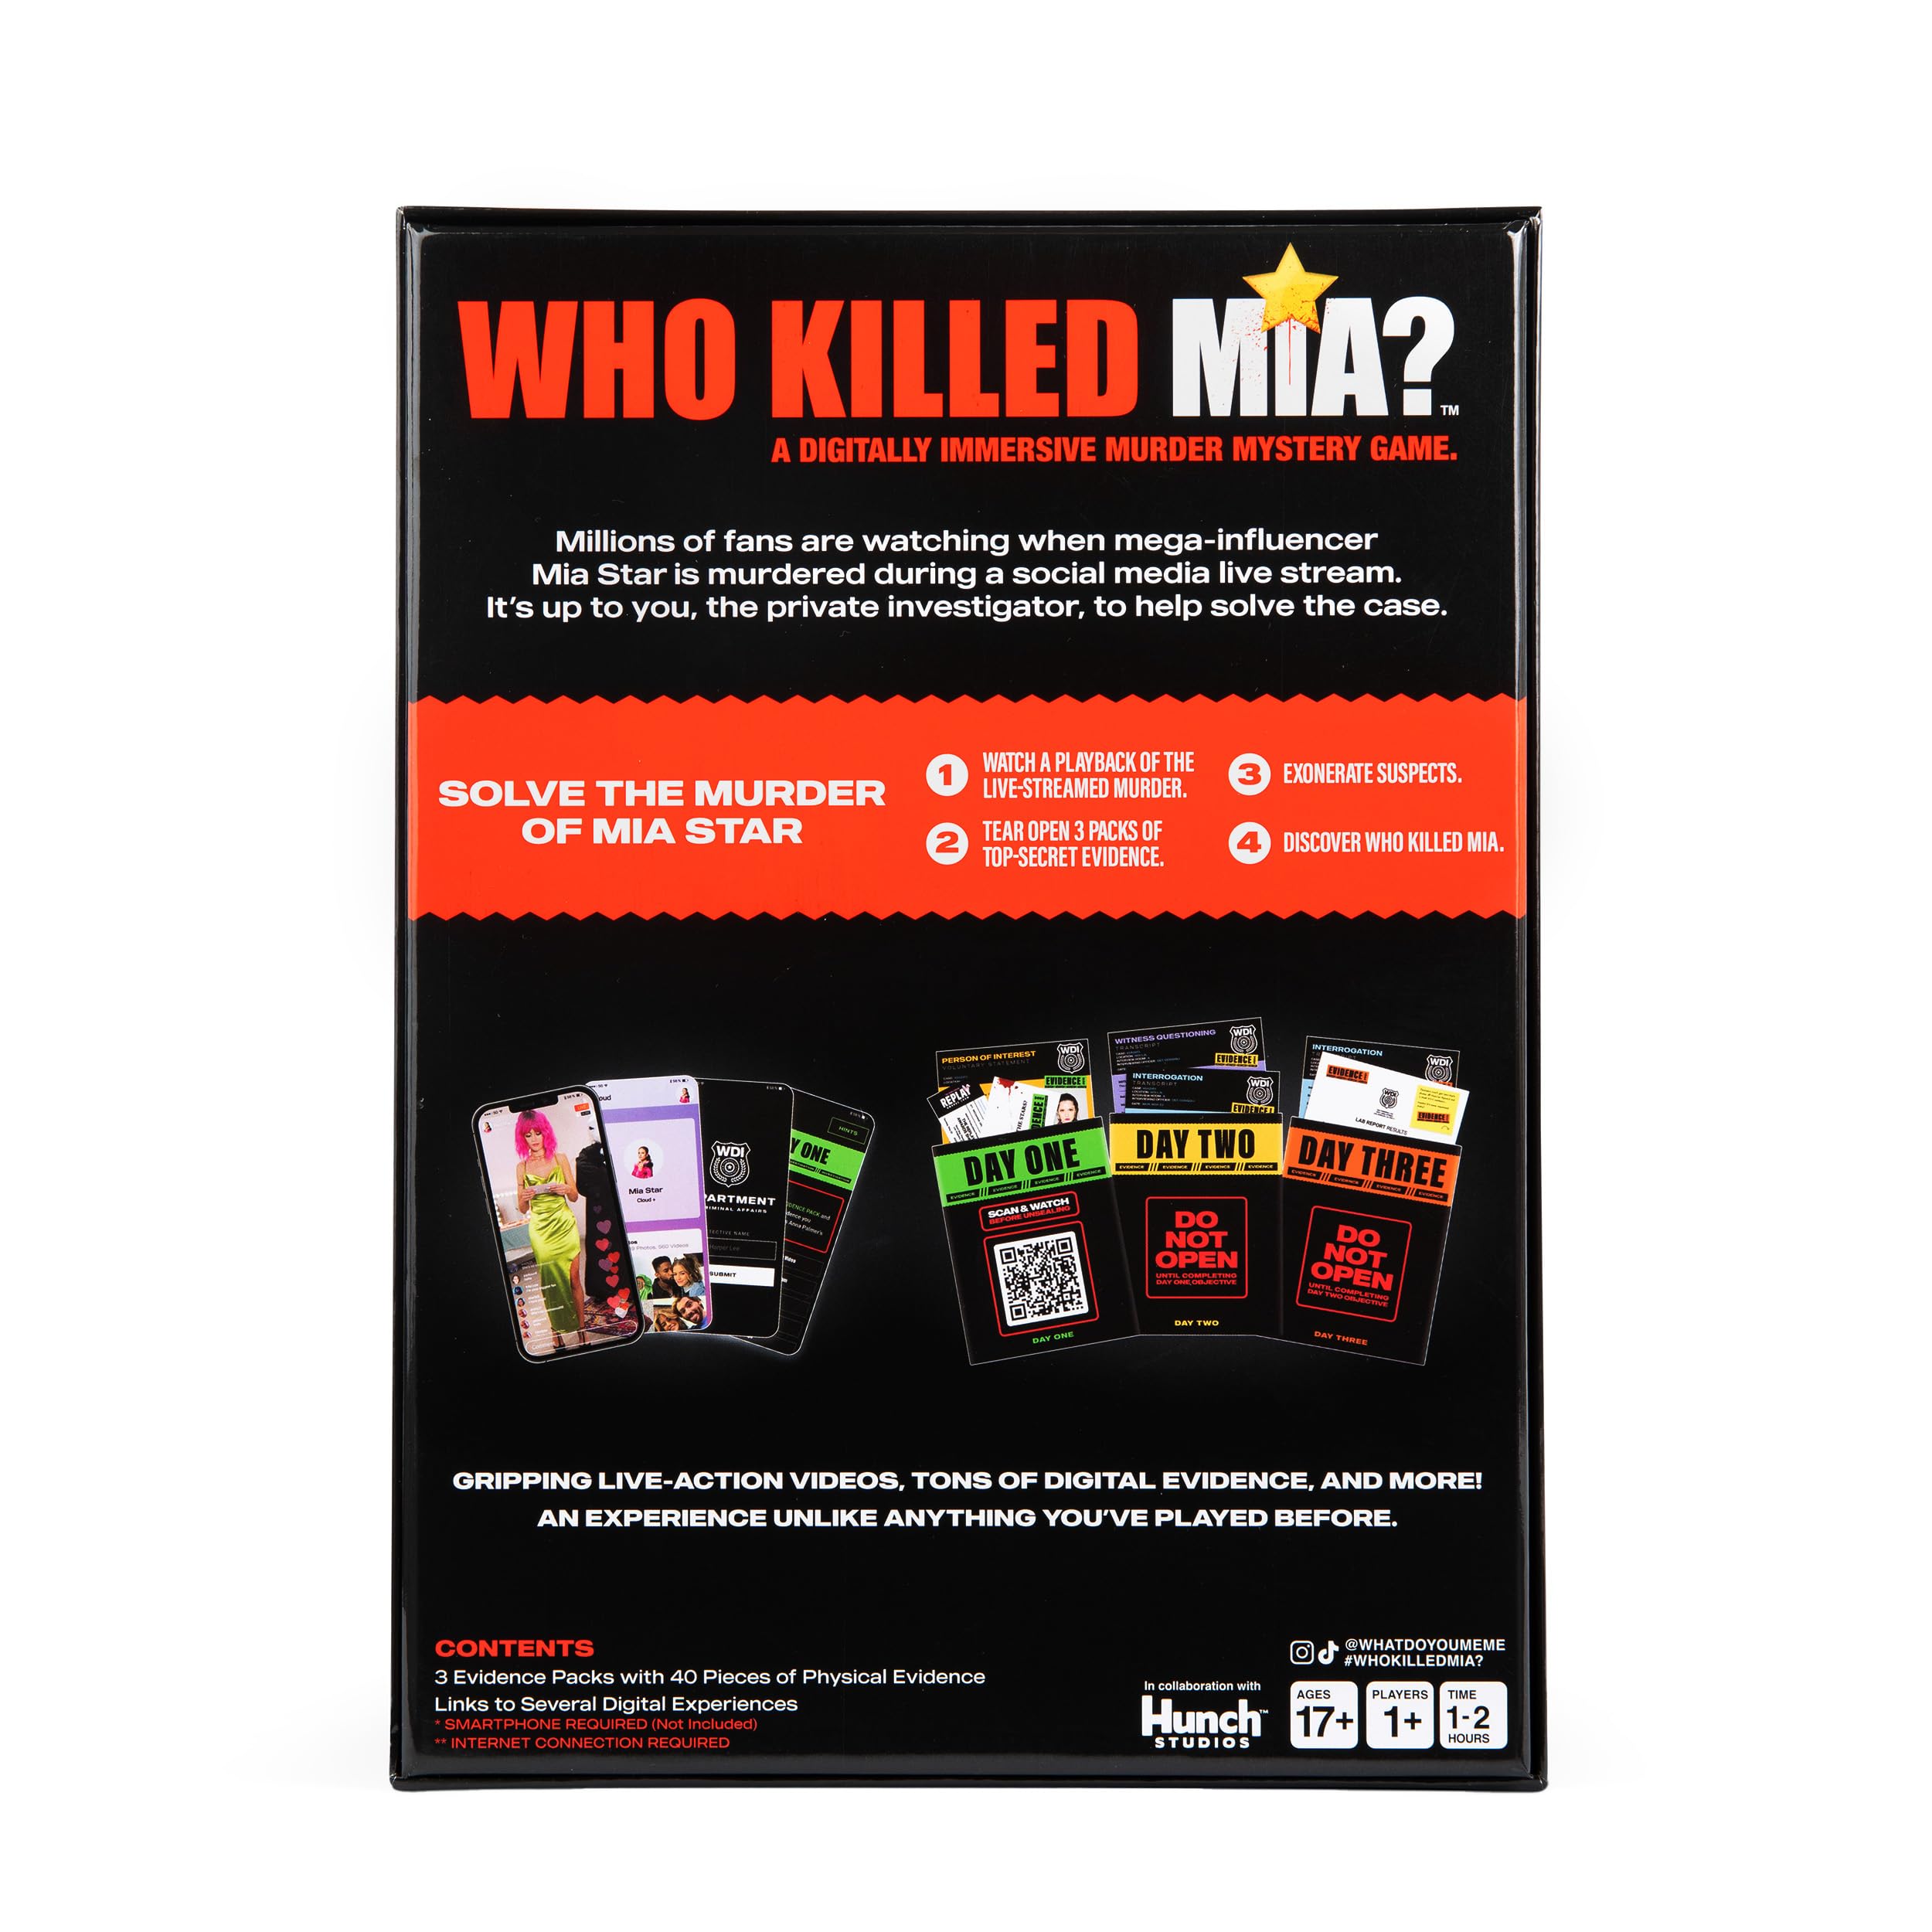 WHAT DO YOU MEME? Who Killed Mia — A Modern Murder Mystery Game True Crime Solving Games for Adults, Find Out who Killed Influencer Mia Star